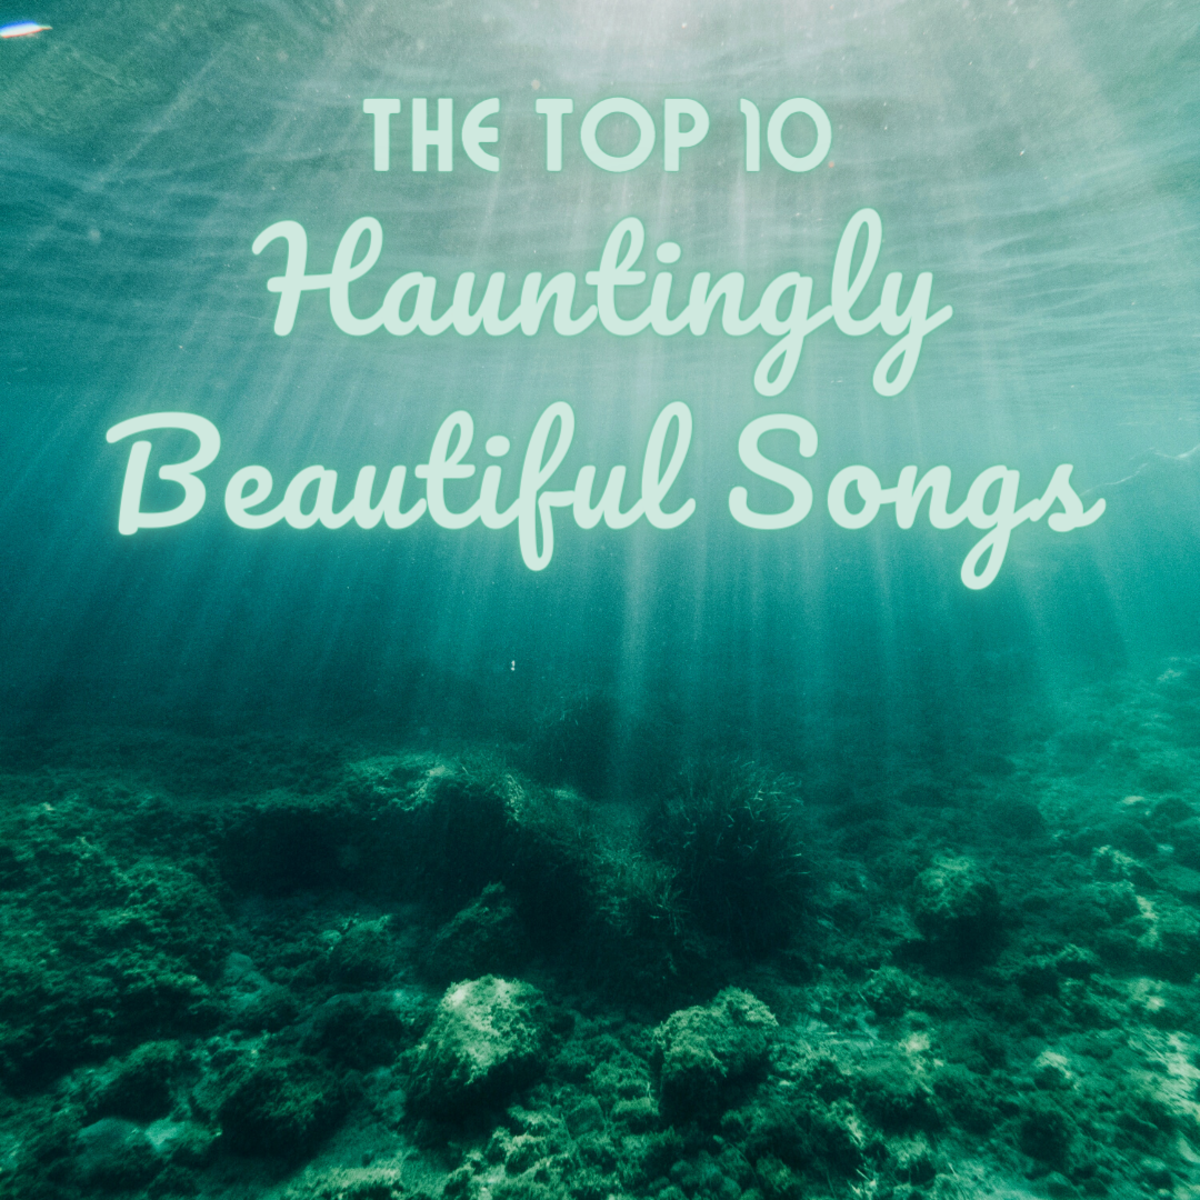 What are the most haunting and beautiful songs? Read on to find out!